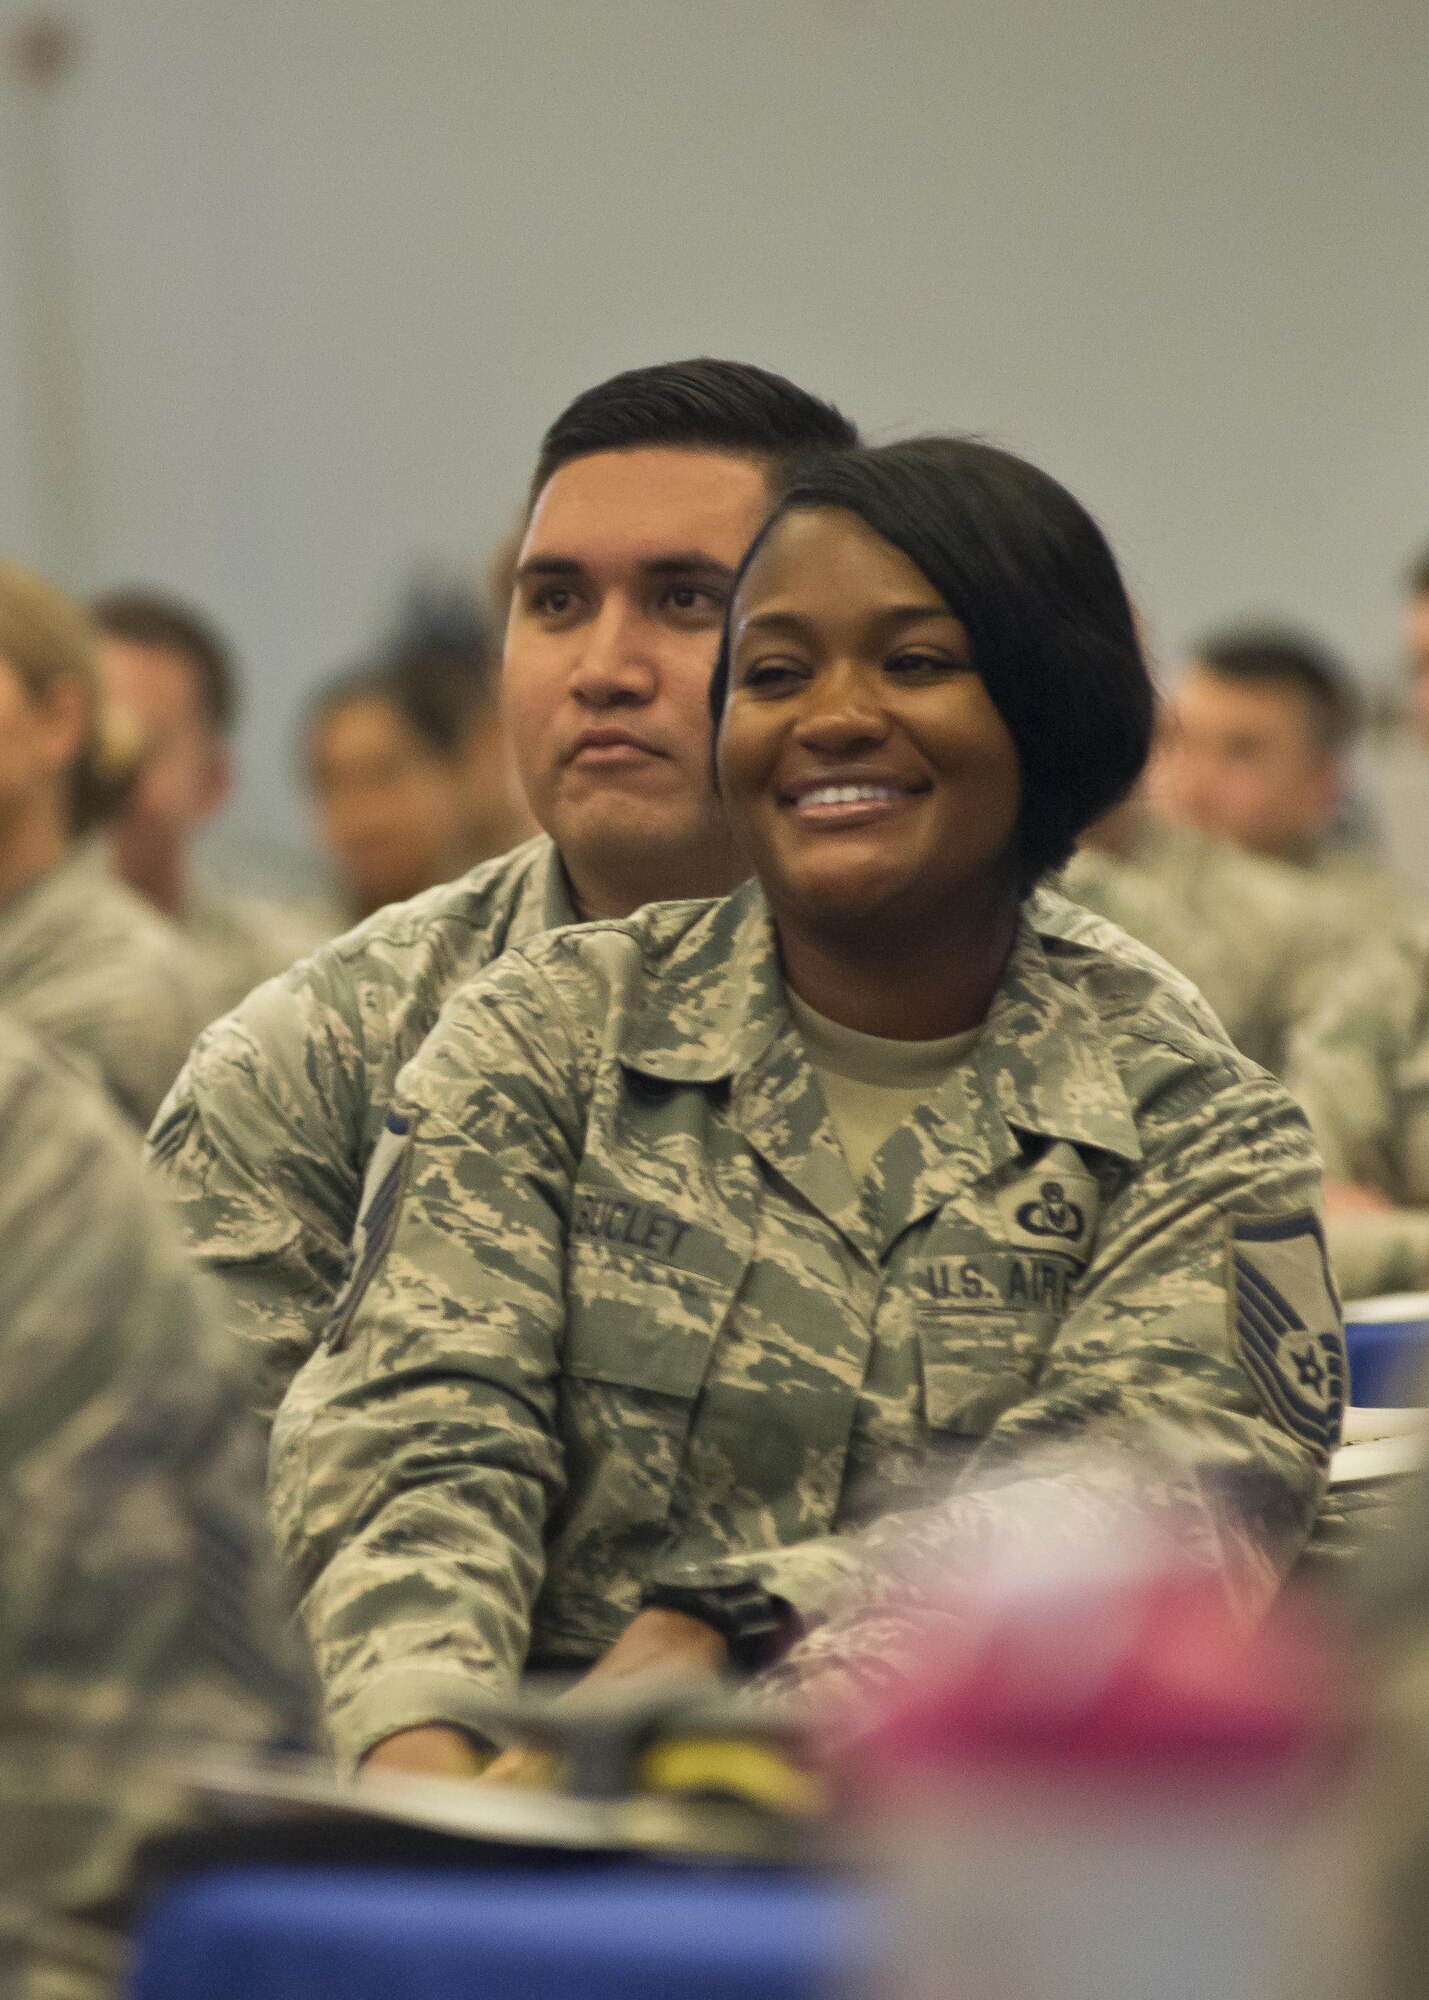 Airmen from across the 50 states, Puerto Rico, Guam, the Virgin Islands, and the District of Columbia that make up the Air National Guard enjoy camaraderie and fellowship at the Air National Guard's 2017 Enlisted Leadership Symposium in Camp Dawson, West Virginia. The three-day event was designed to provide enlisted Airmen of all levels with a broad range of leadership tools to apply in their units.